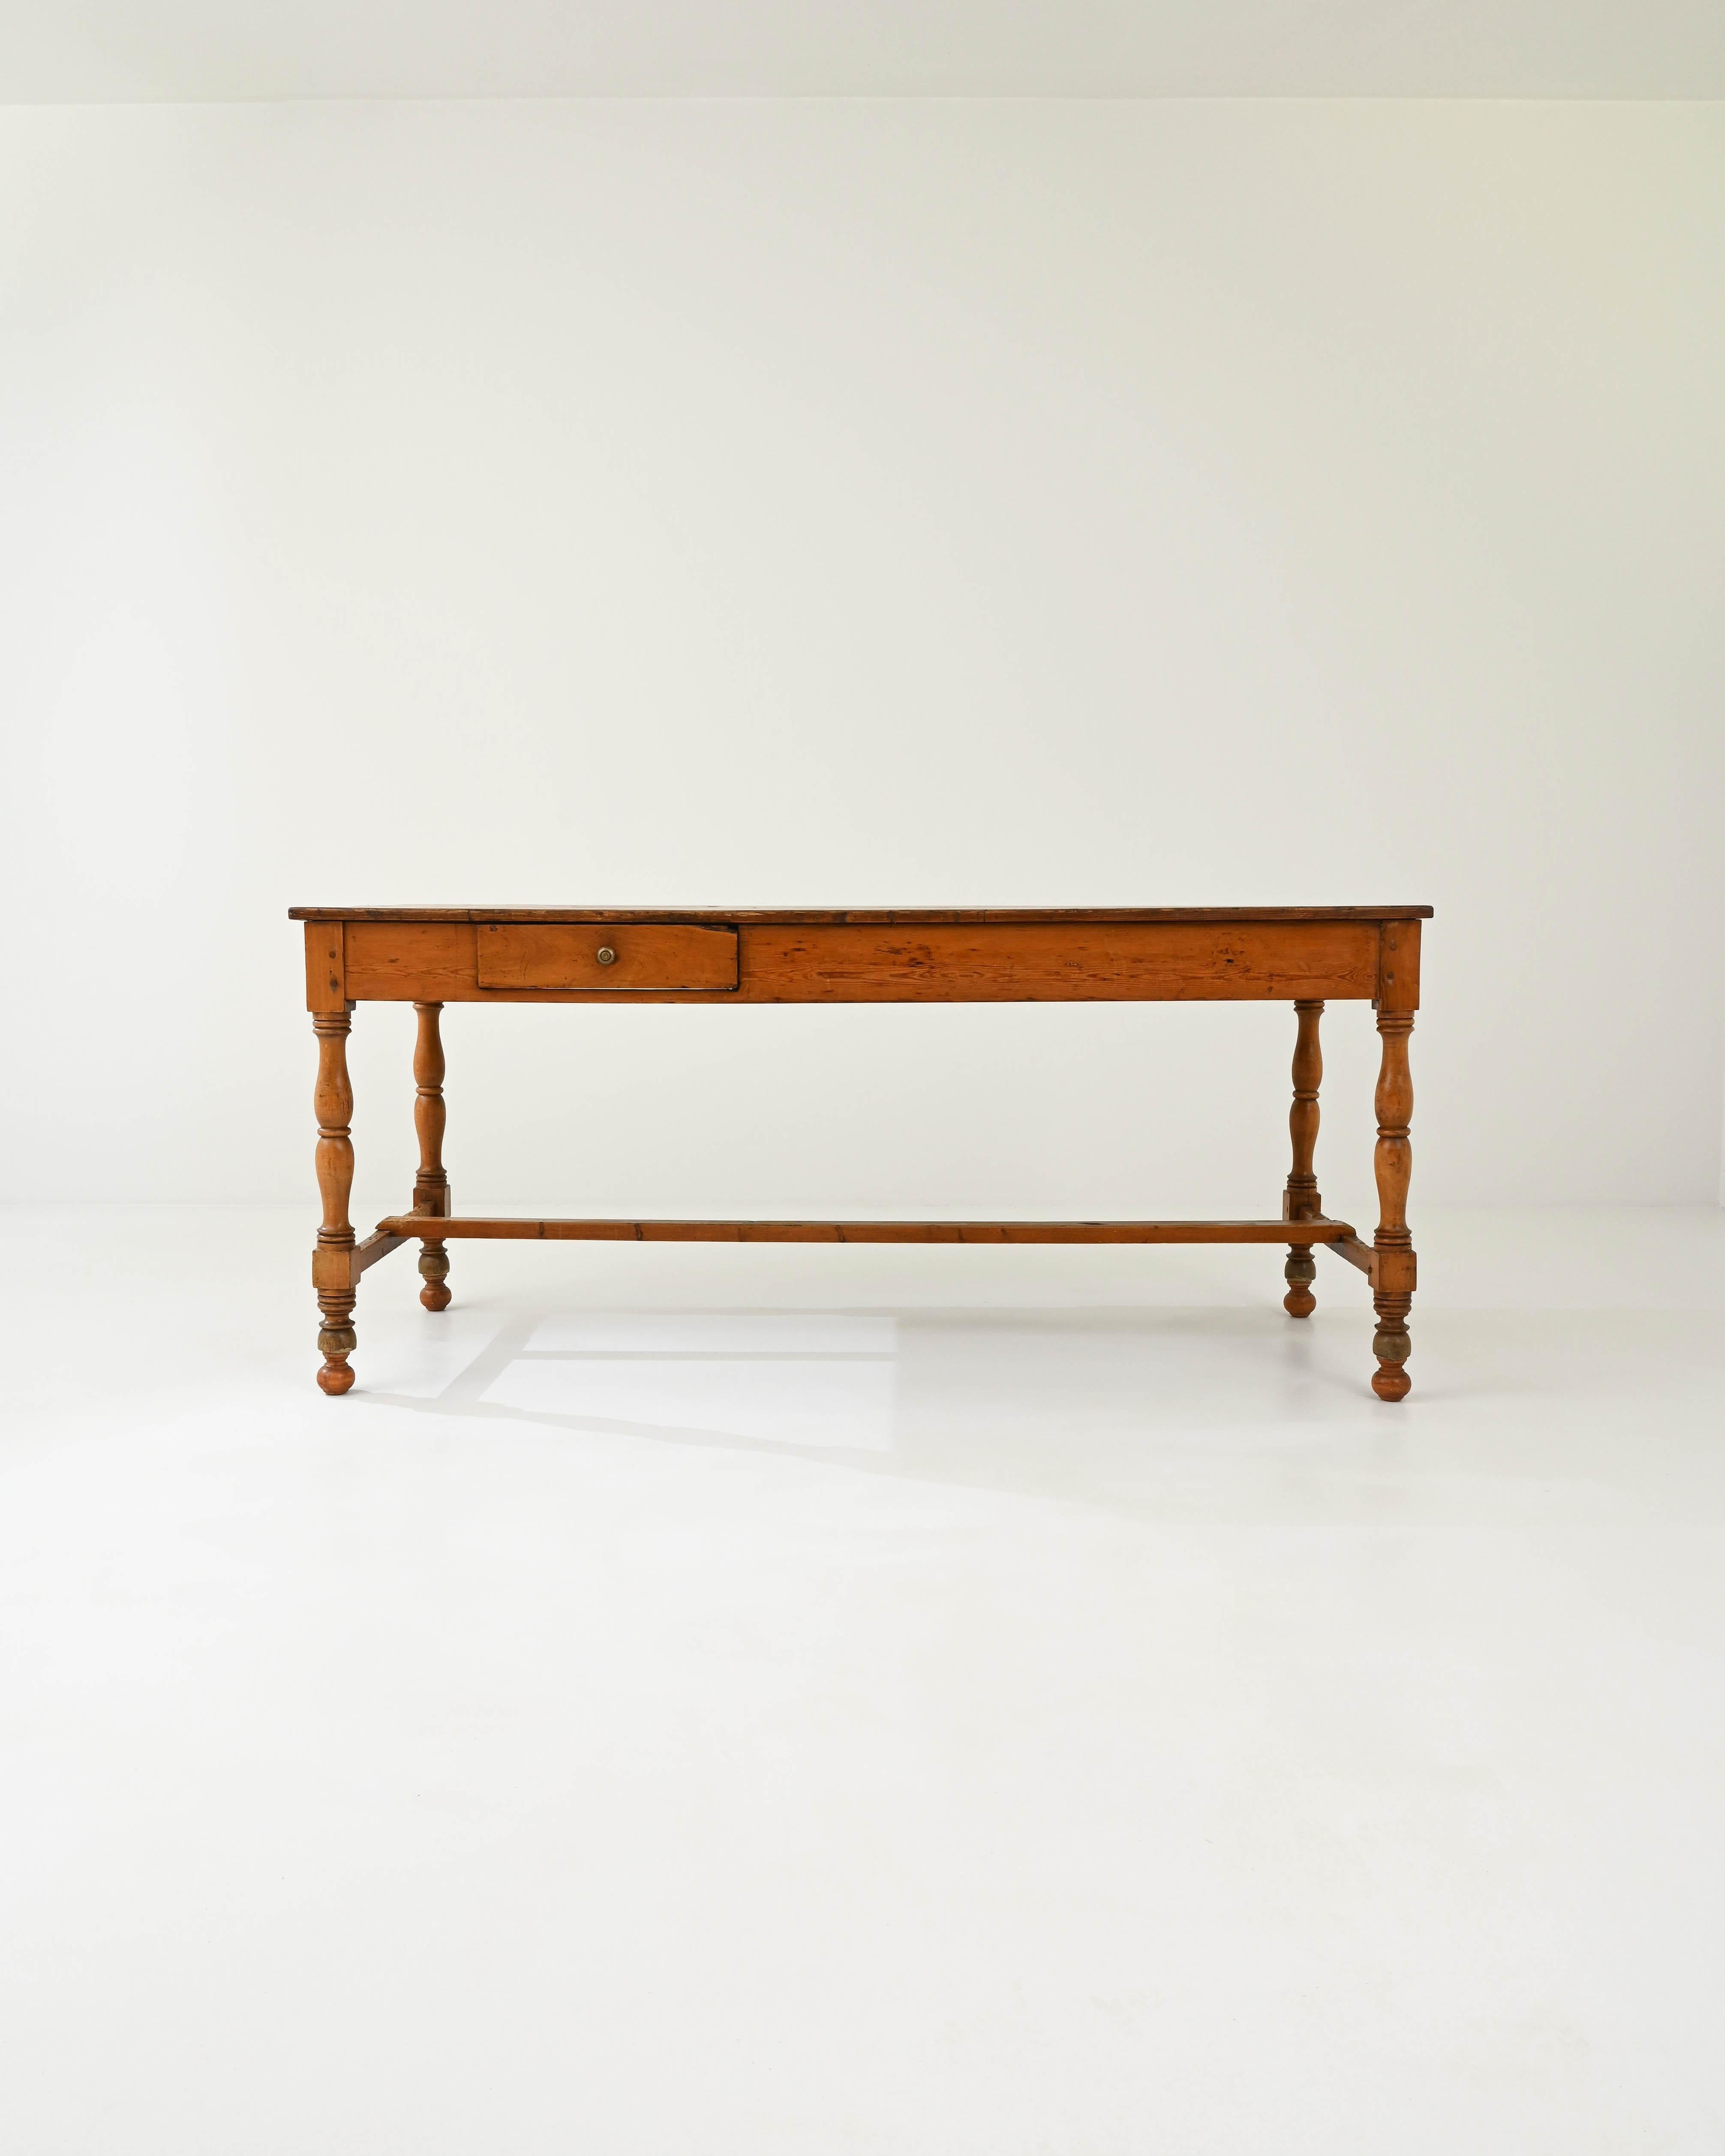 A wooden dining table created in 19th century France. Bright and cheery, yet crafted with a sense of dignity, this long and slender table communicates a sense of grace and joy. With mortise and tenon joints, a classic trestle construction, and